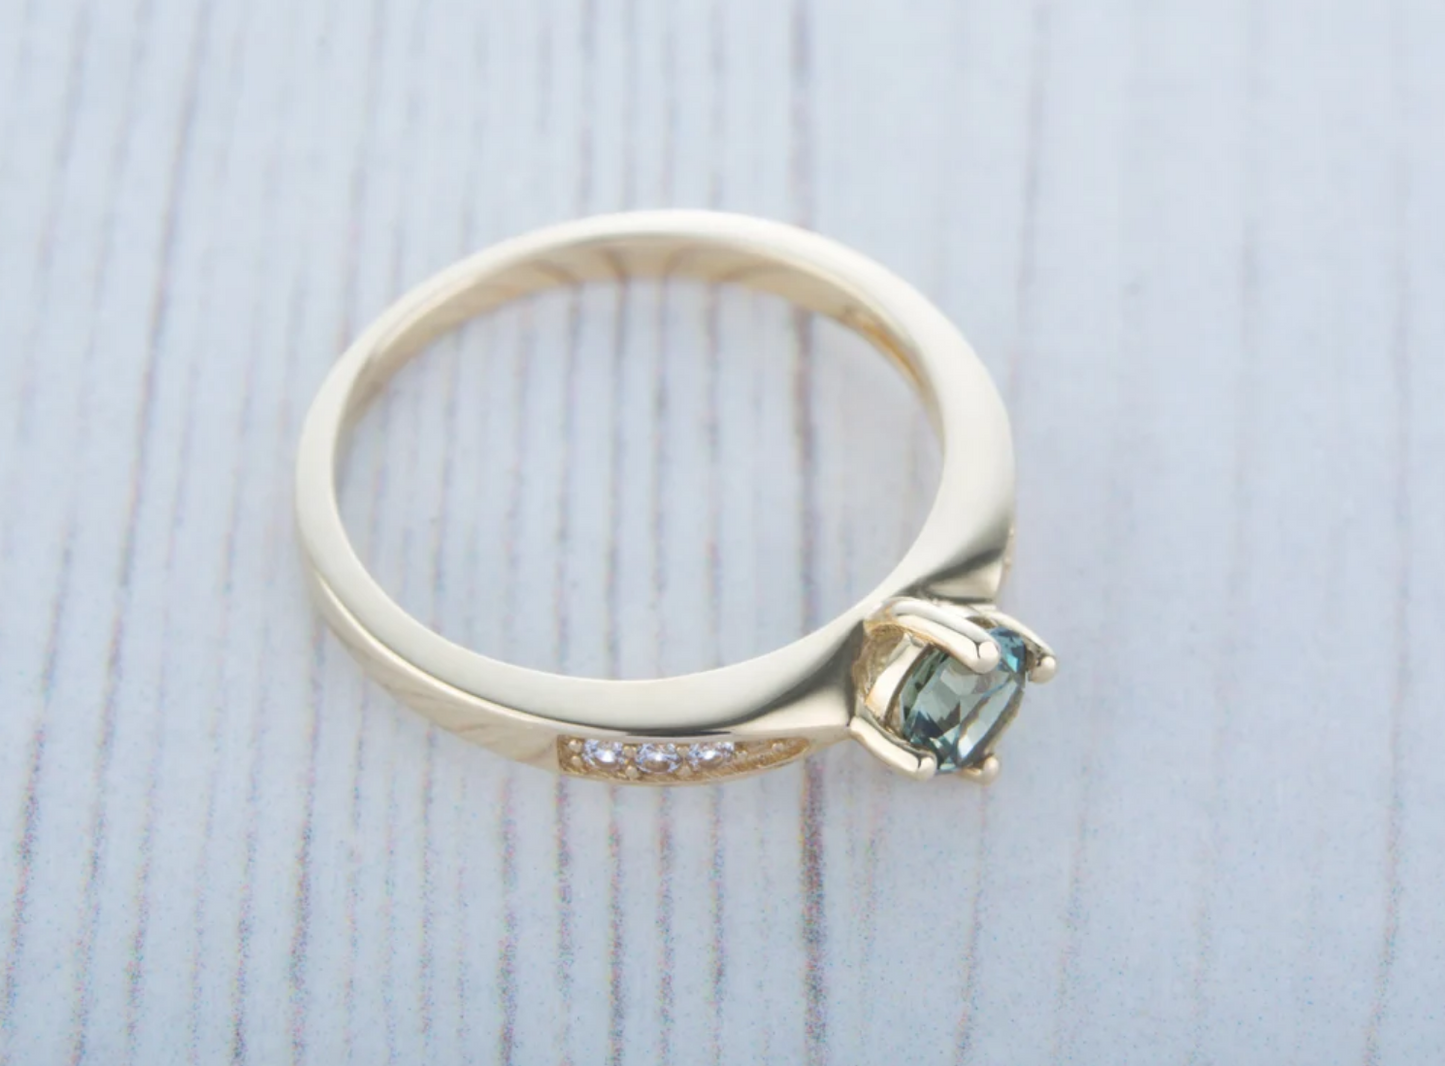 Size O / US 7 10K Solid Yellow Gold and Green Sapphire Engagement ring.